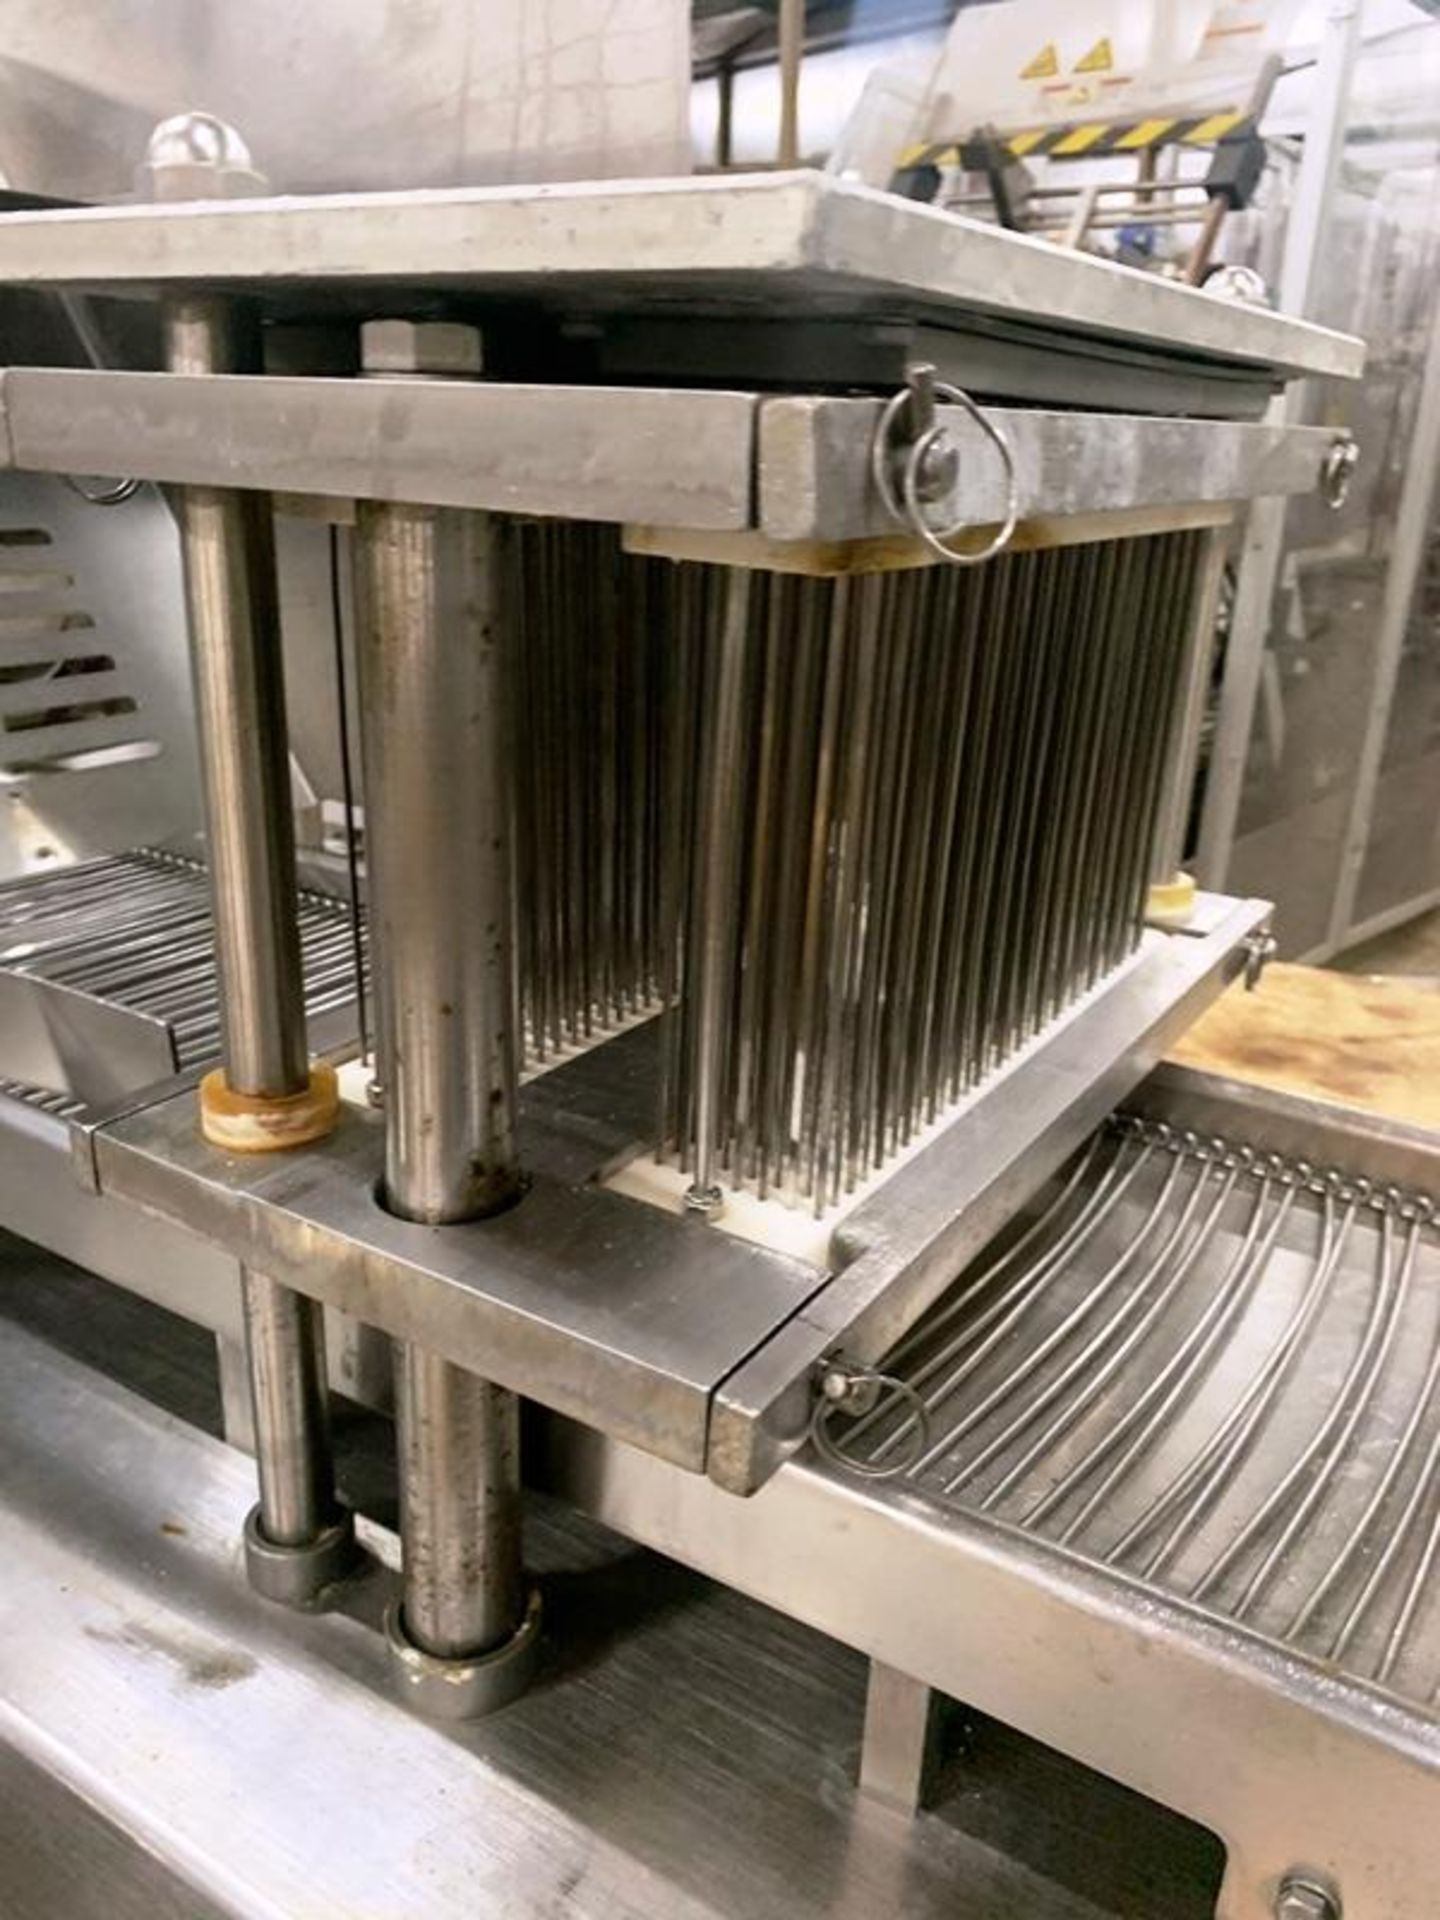 Ross Mdl. TC700M Tenderizer (Located in Sandwich, IL) - Image 5 of 6